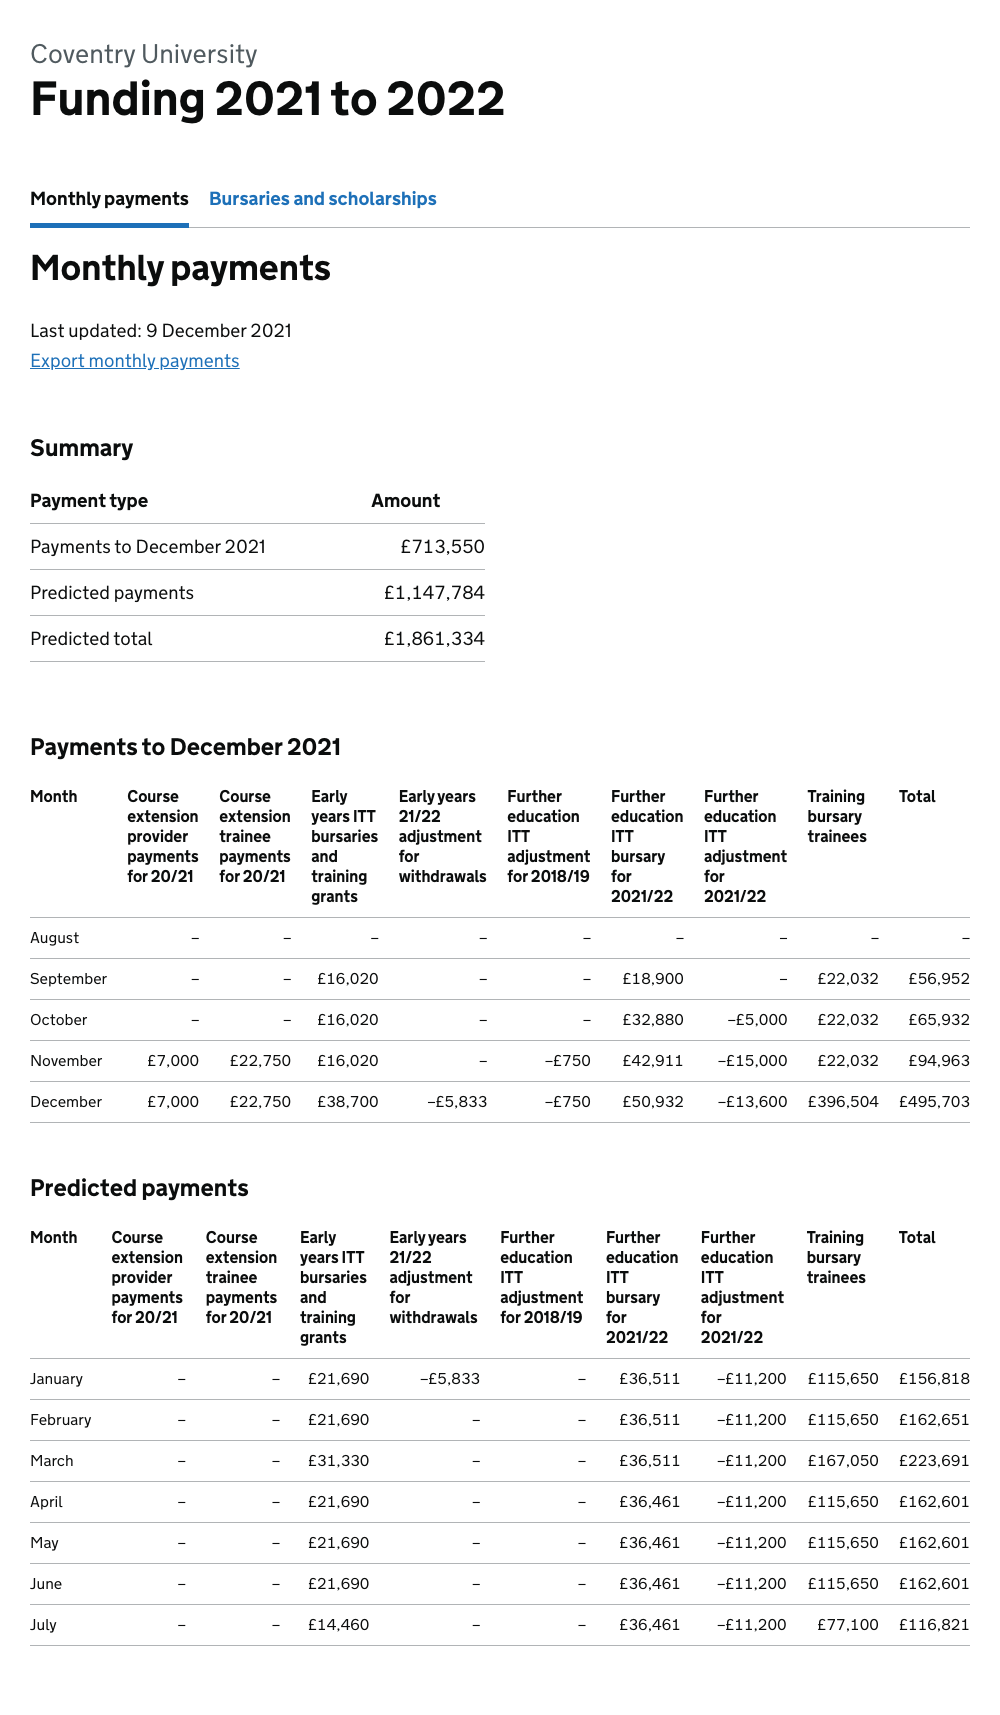 Monthly payments shown together. The table has many columns and is harder to read